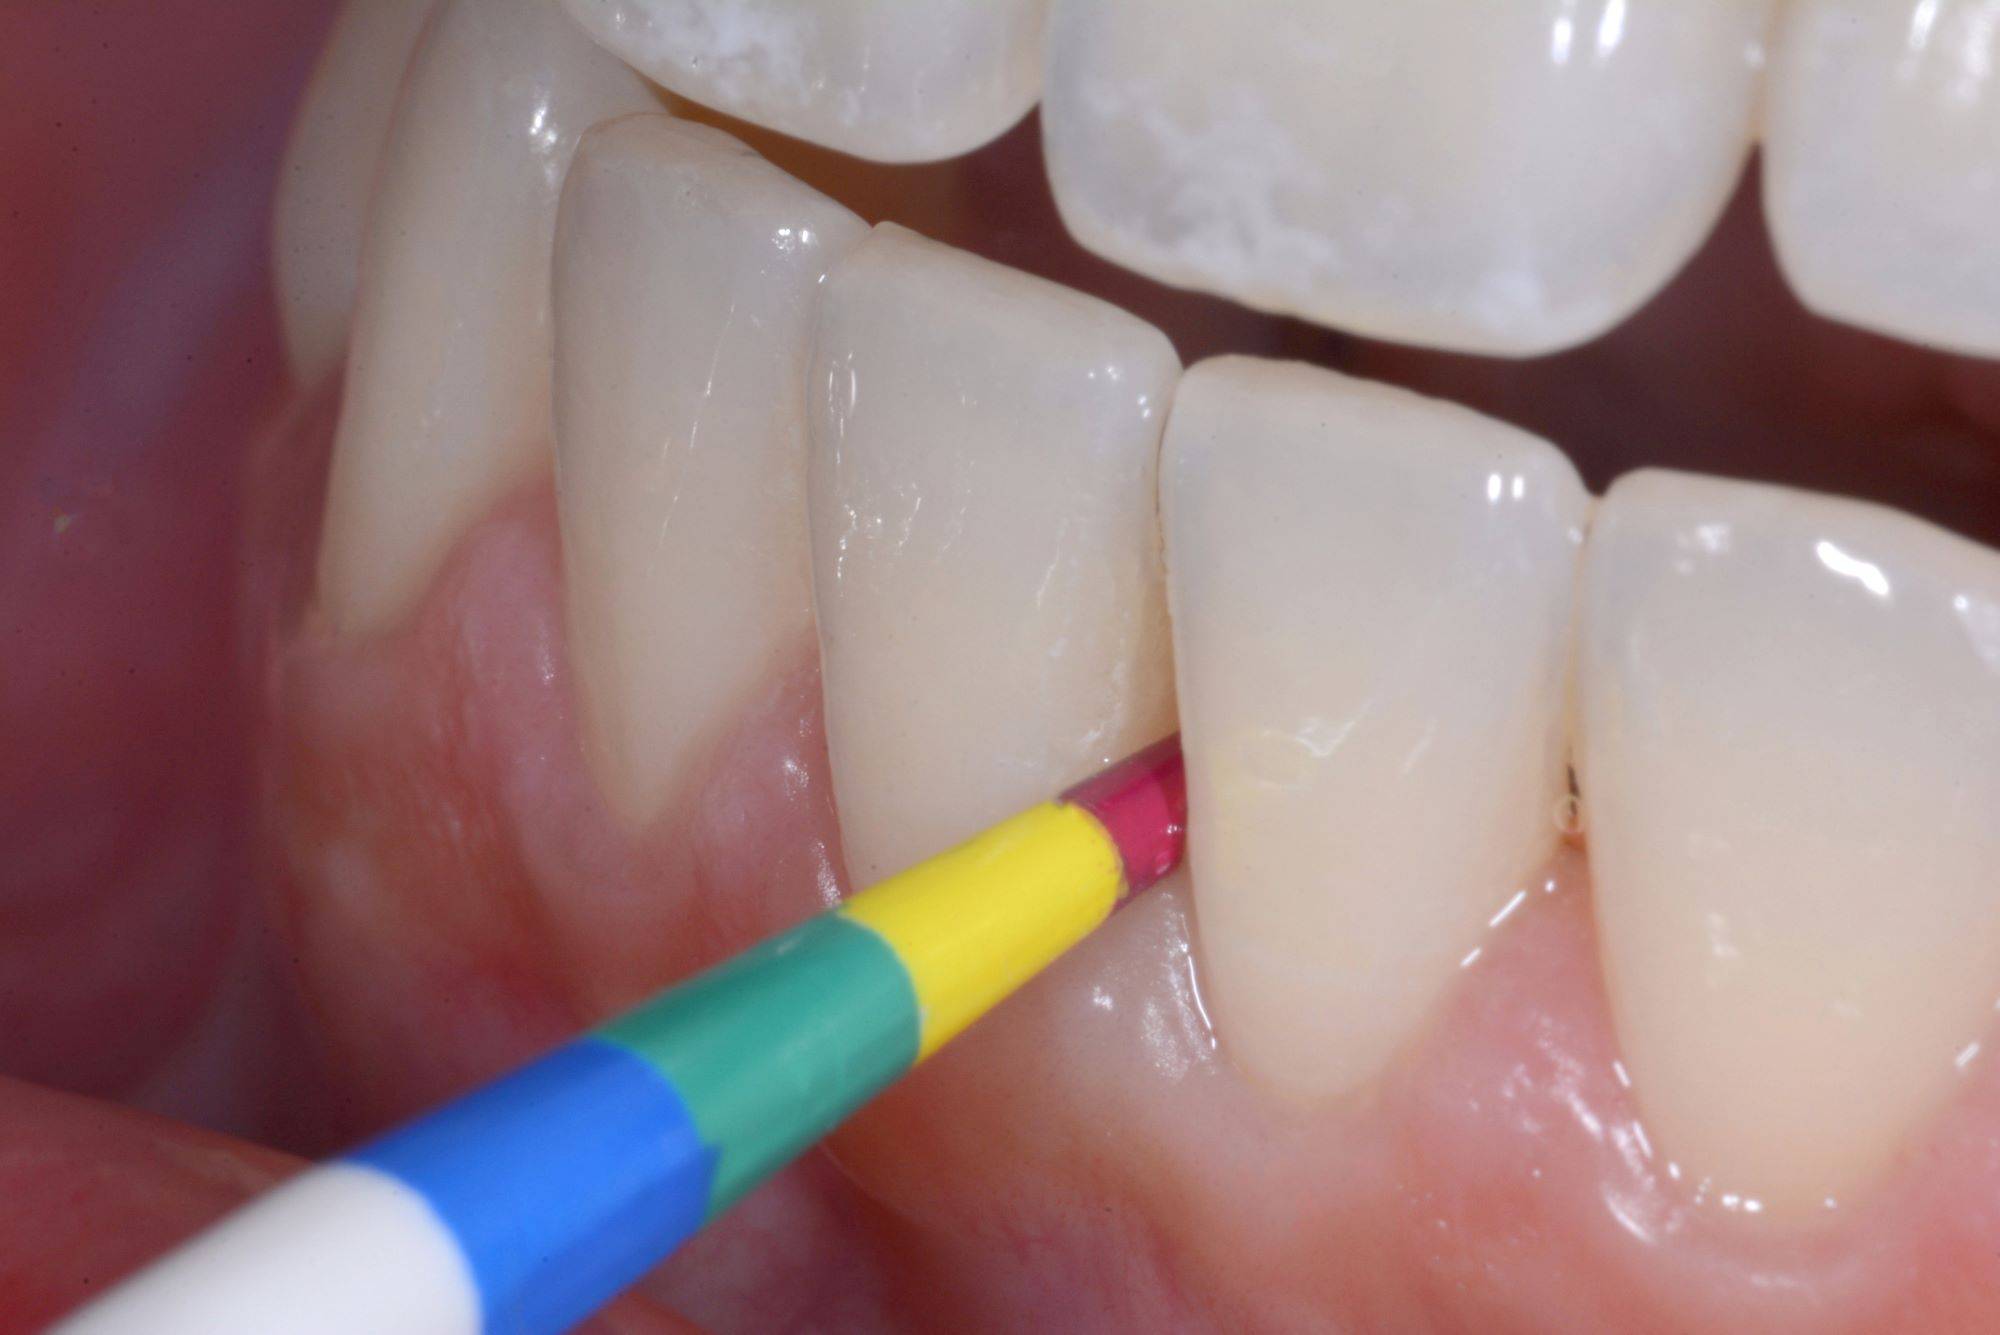 Gauge with colour coded tip inserted in between teeth